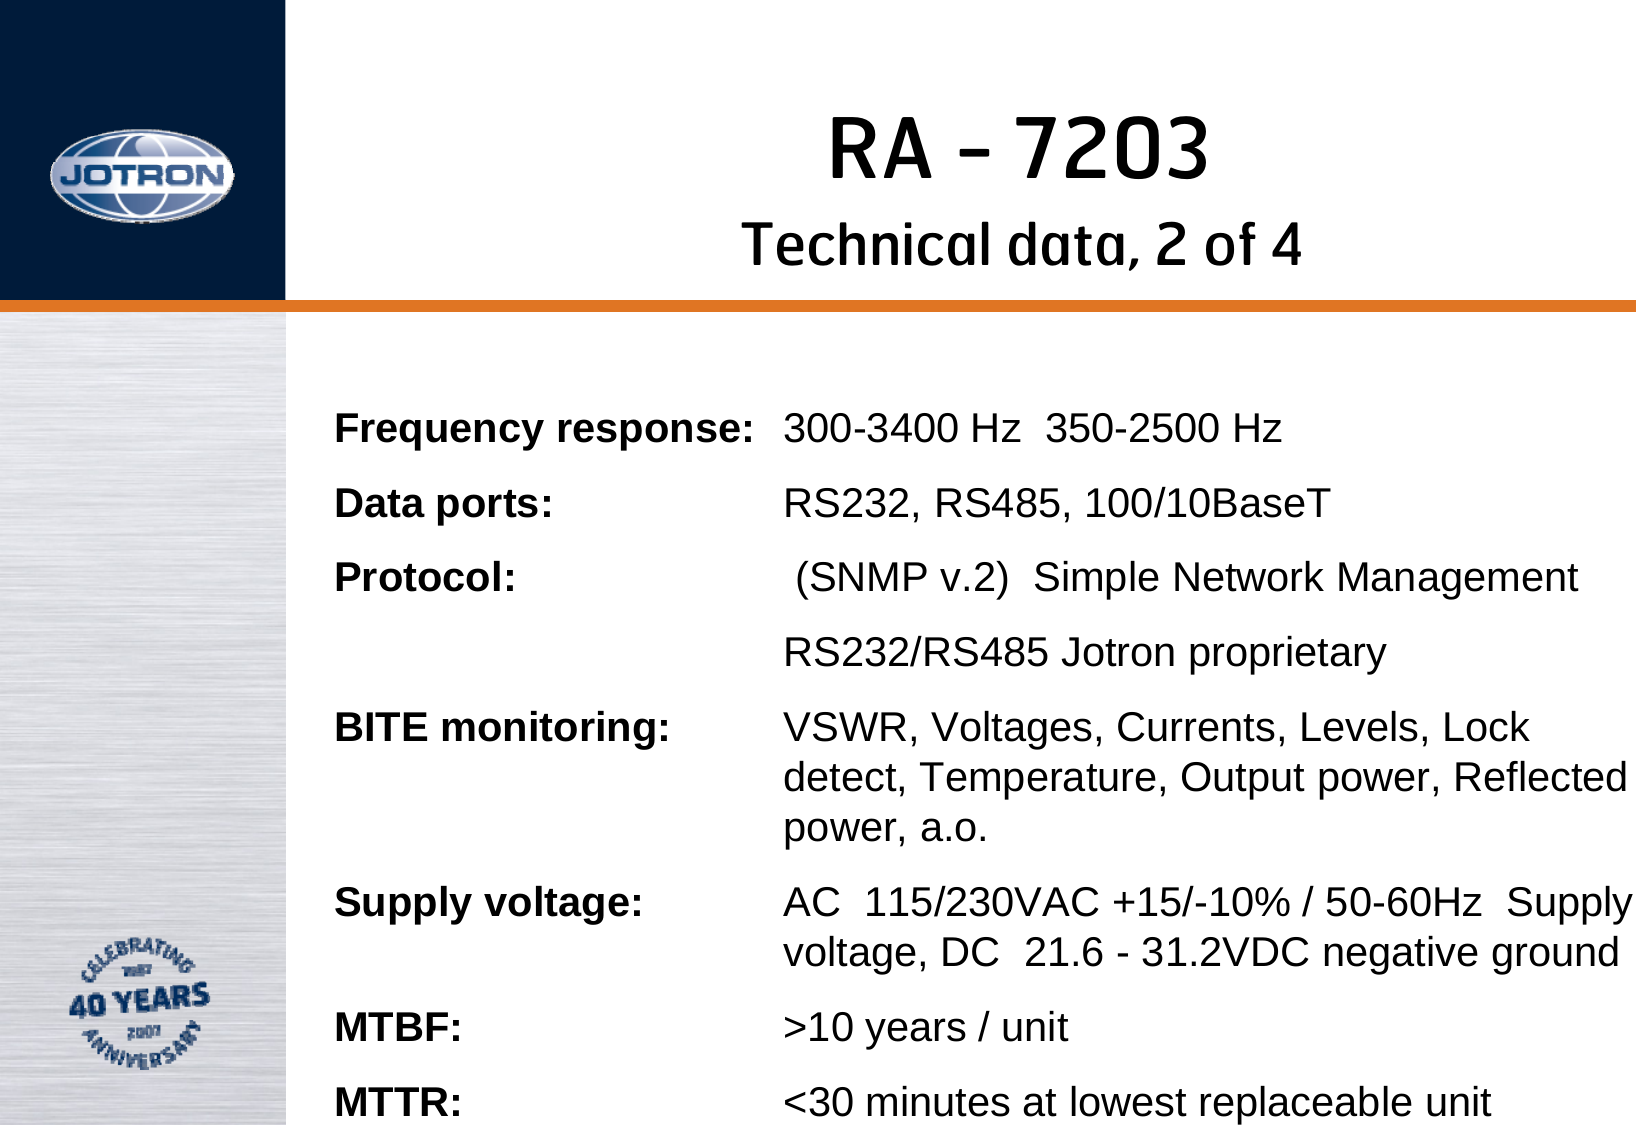 RA - 7203Frequency response: 300-3400 Hz  350-2500 HzData ports: RS232, RS485, 100/10BaseT Protocol: (SNMP v.2)  Simple Network ManagementRS232/RS485 Jotron proprietaryBITE monitoring: VSWR, Voltages, Currents, Levels, Lock detect, Temperature, Output power, Reflected power, a.o.Supply voltage: AC  115/230VAC +15/-10% / 50-60Hz  Supply voltage, DC  21.6 - 31.2VDC negative ground  MTBF: &gt;10 years / unit  MTTR: &lt;30 minutes at lowest replaceable unitTechnical data, 2 of 4